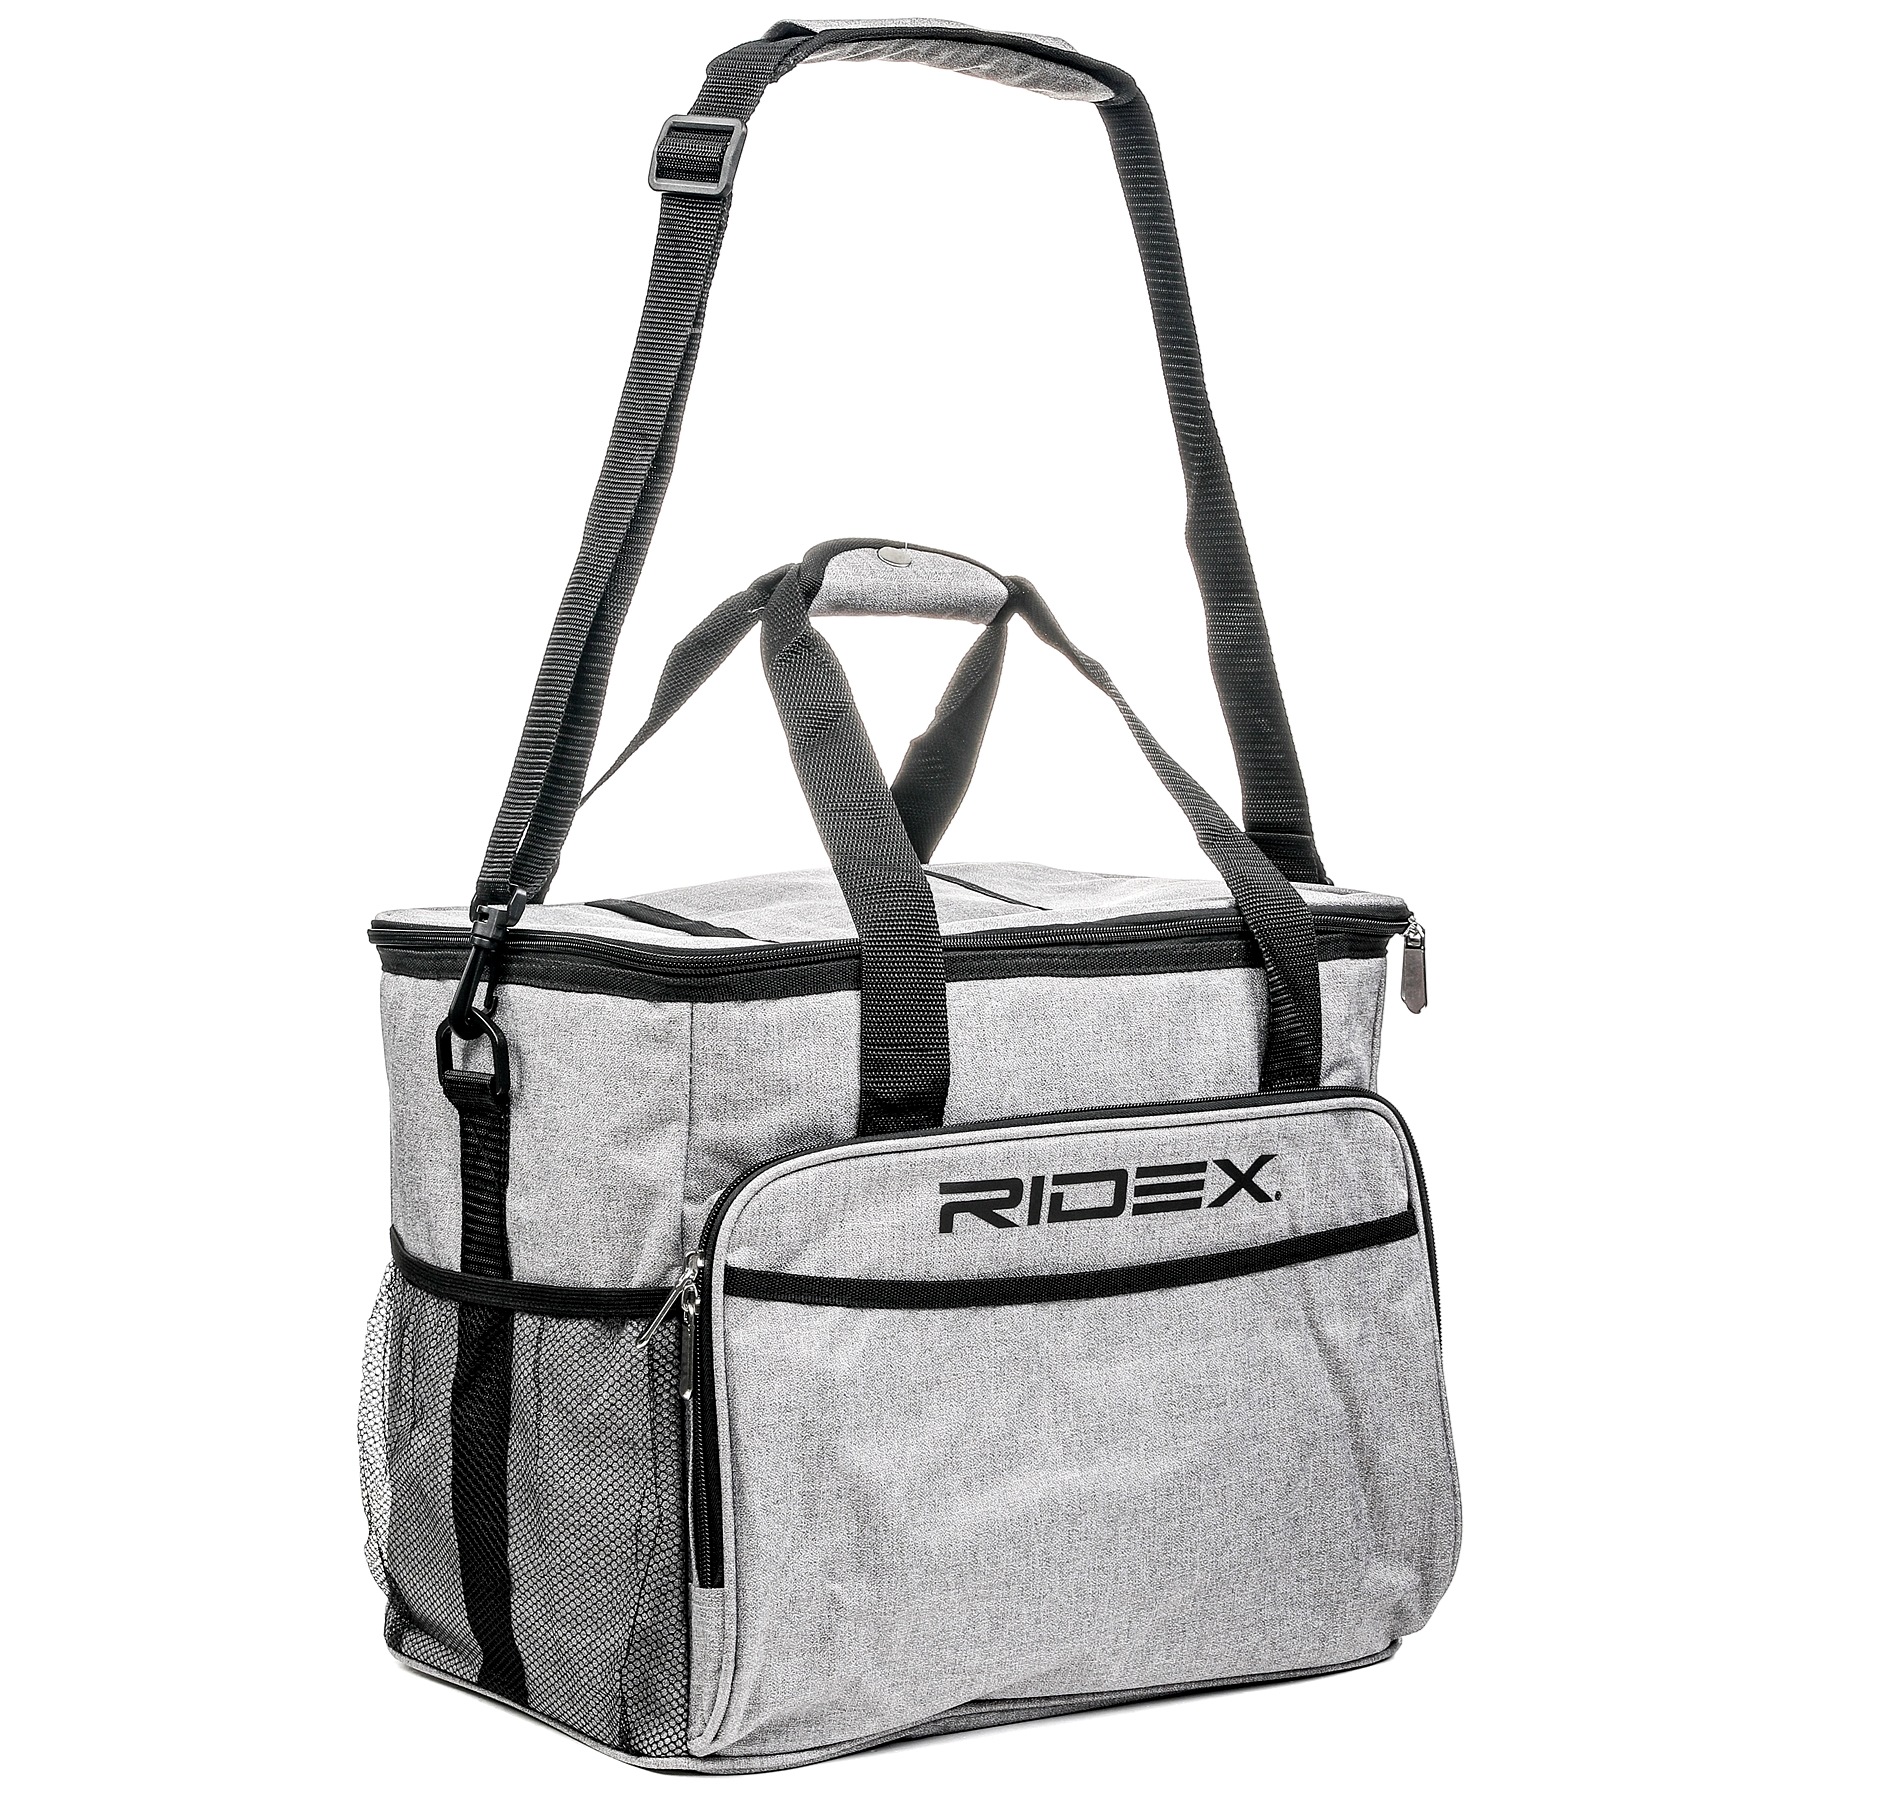 Cooler bag 6006A0002 in Camping accessories catalogue